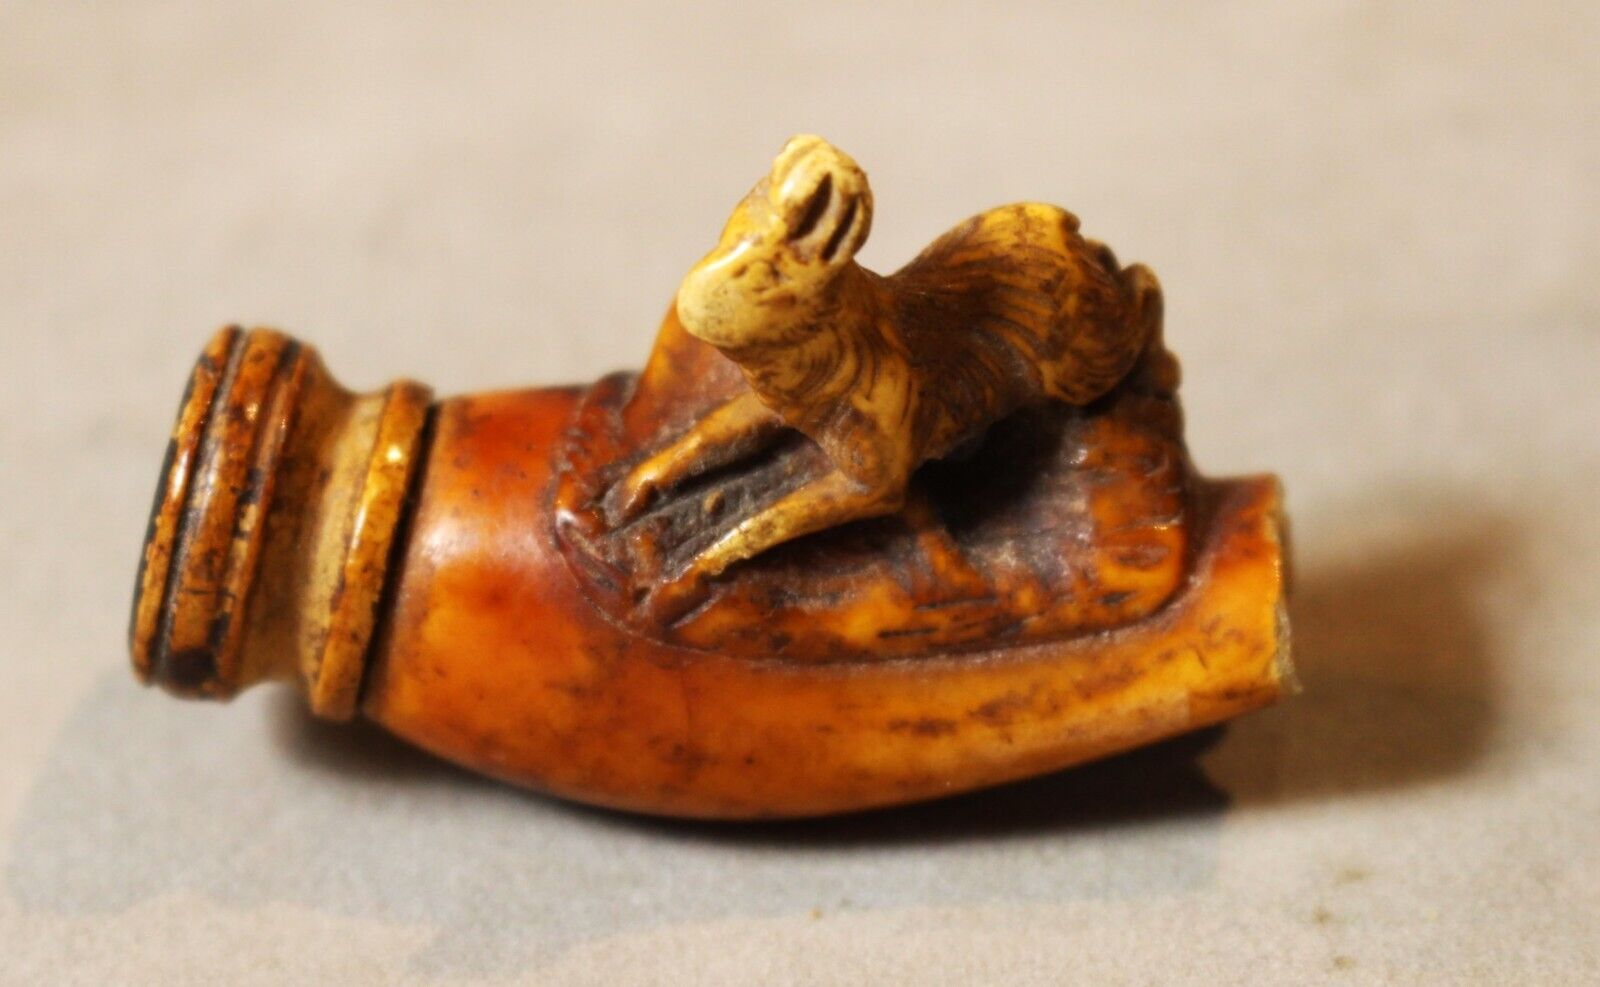 Late 19th or Early 20th c. Meershaum Cigarette Holder with Carved Rabbit c. 1895